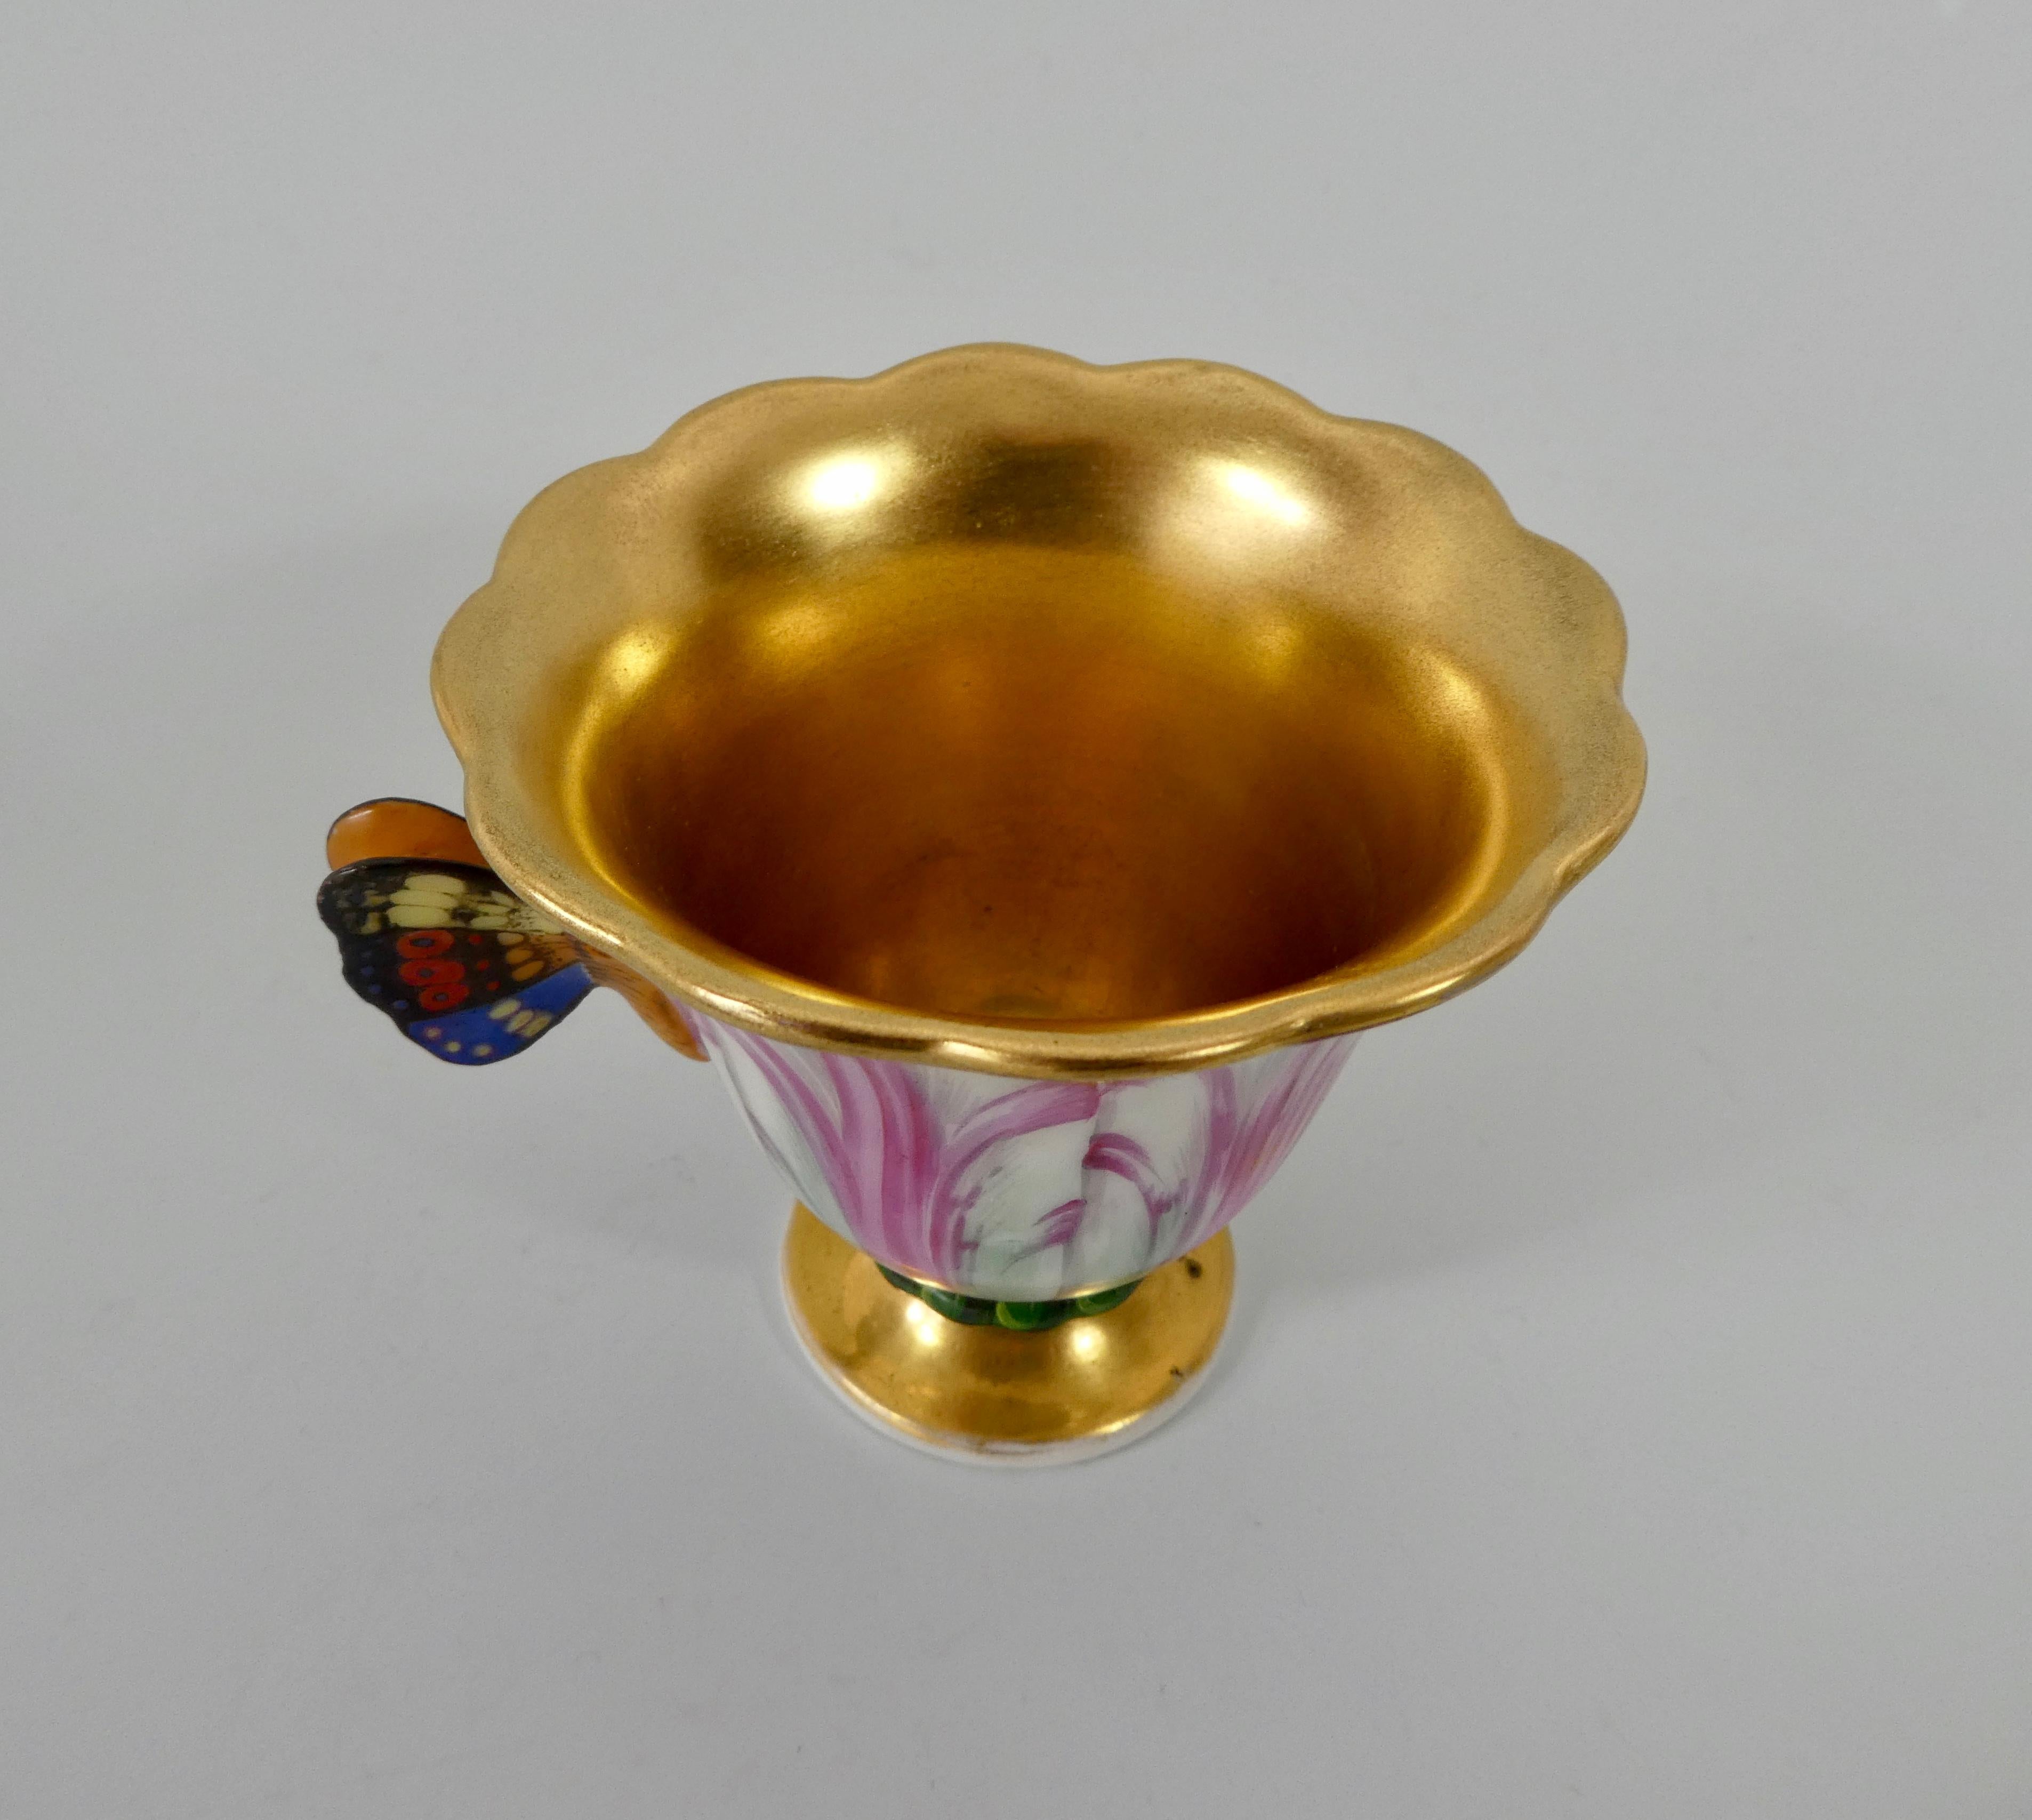 Early 19th Century Spode Porcelain Tulip Cup and Saucer, circa 1820